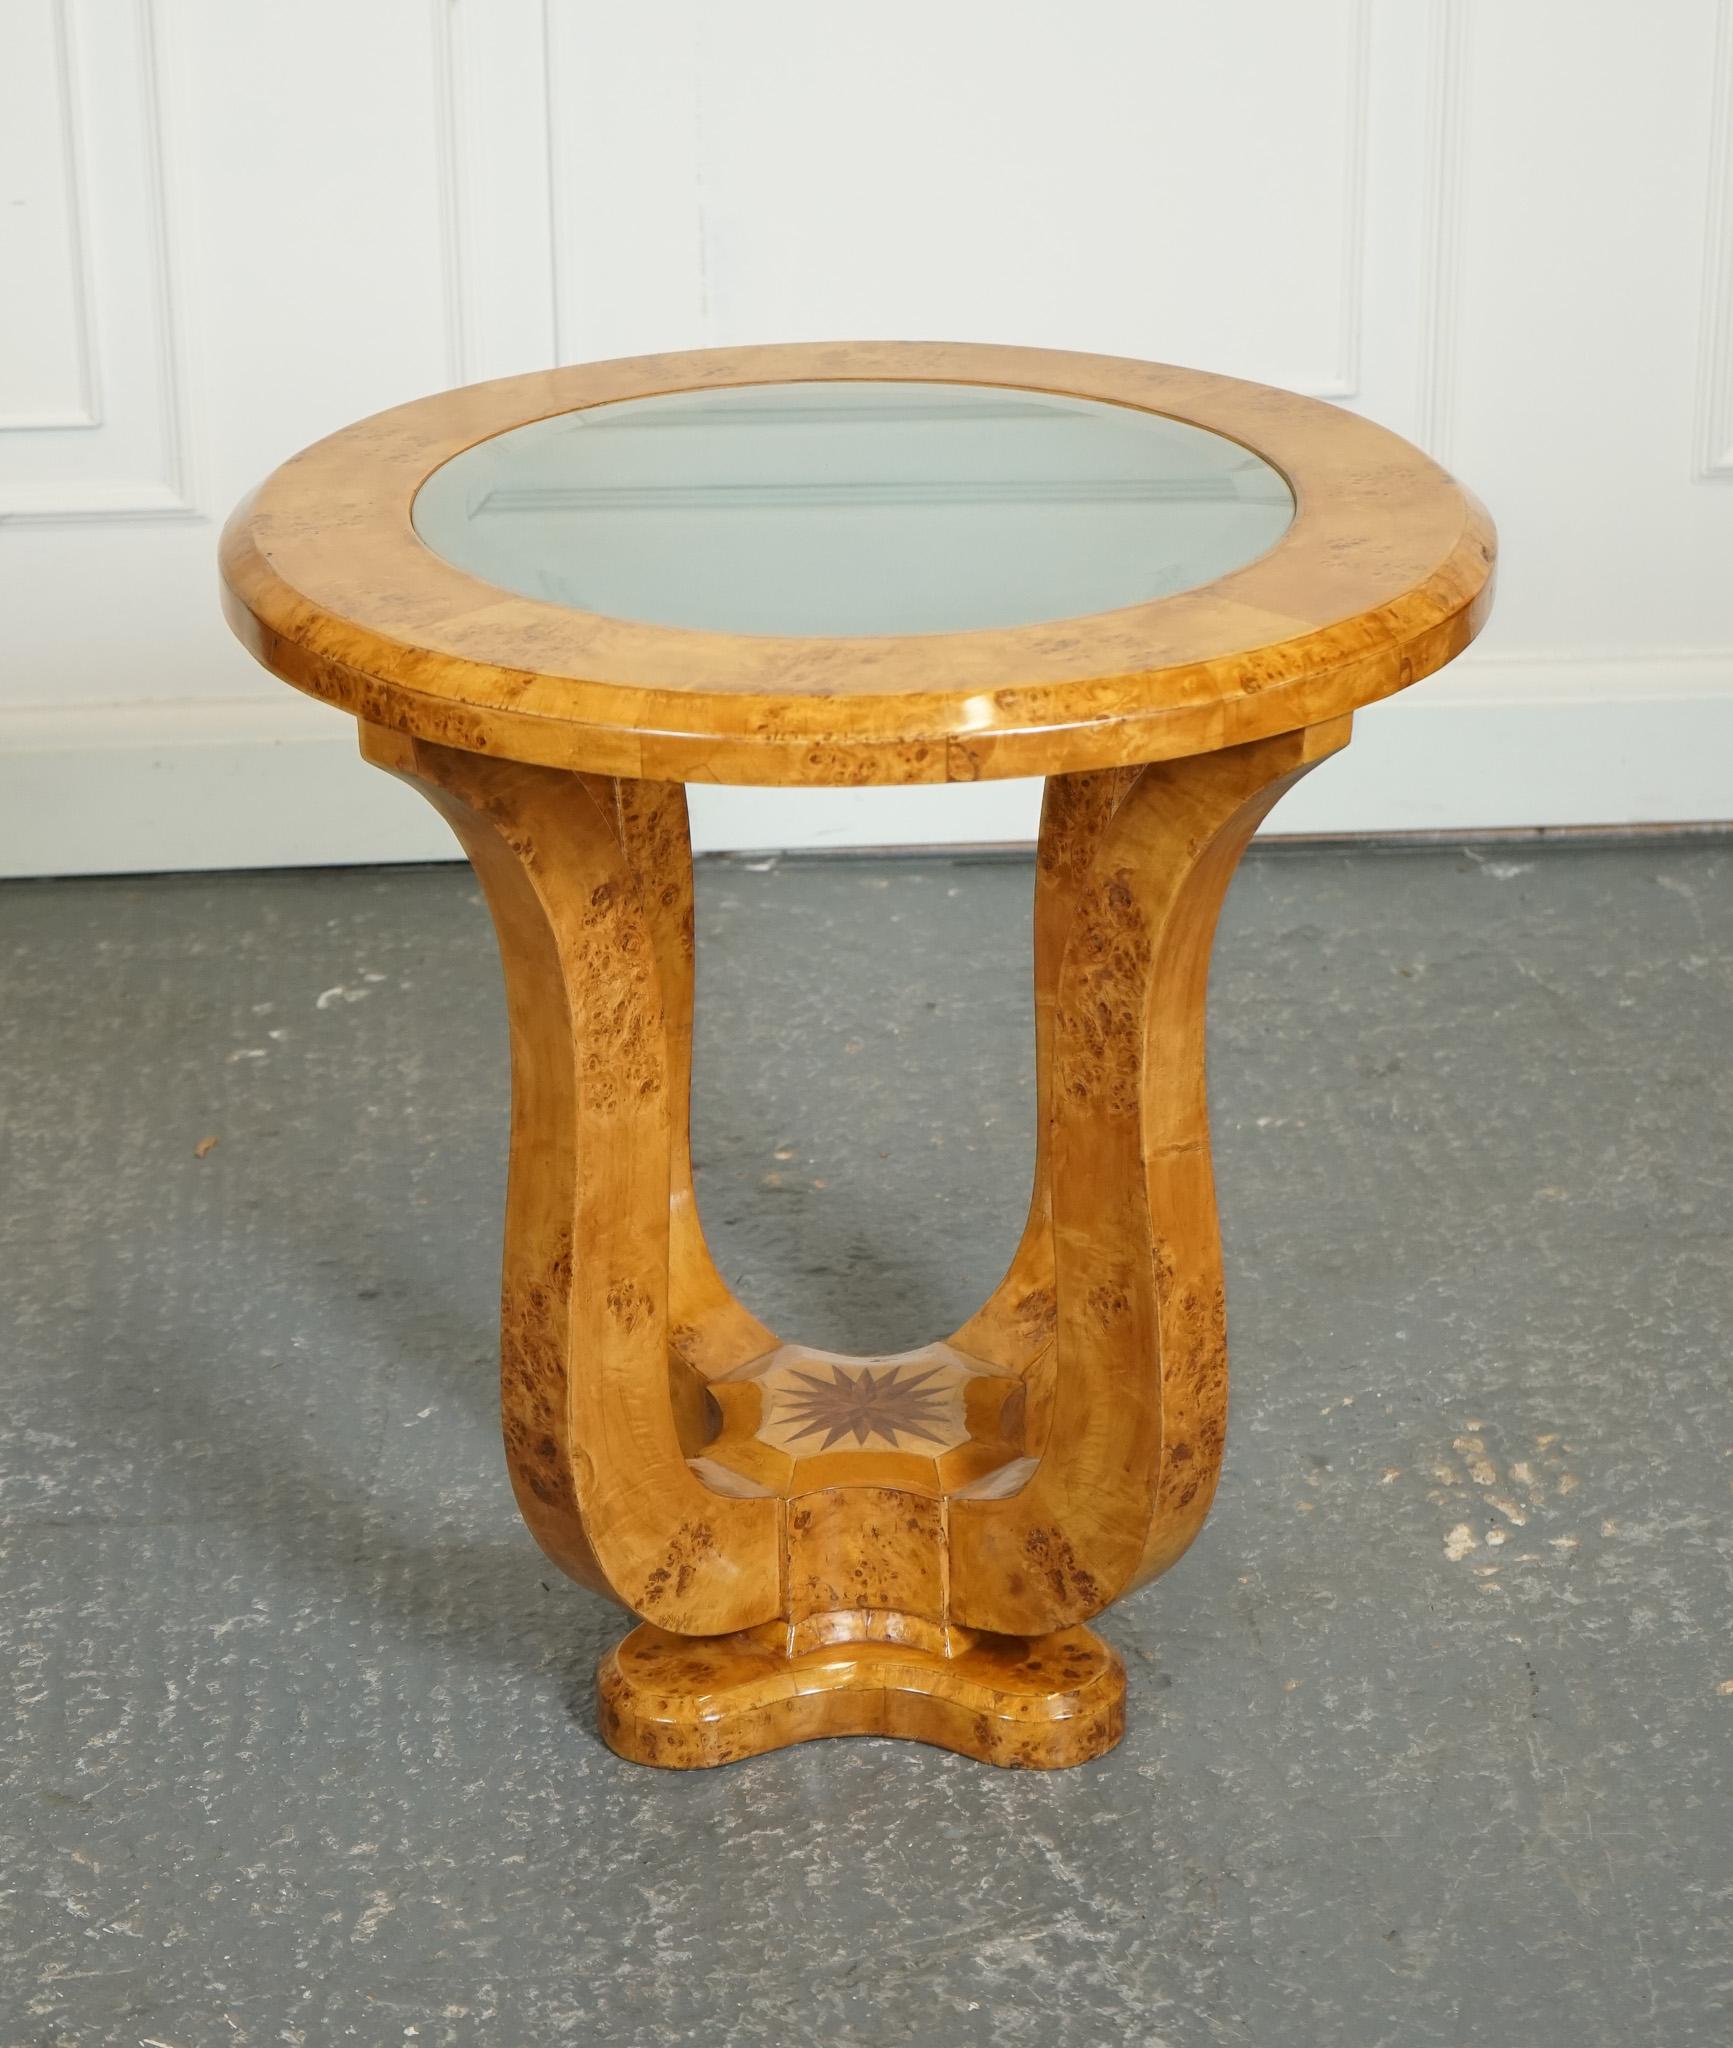 We are delighted to offer for sale this Art Deco style Burr Walnut Console Table.

The Art Deco Burr Walnut Veener on Hardwood Circular Pedestal Round Console Center Table is a striking piece of furniture that showcases the elegance and style of the